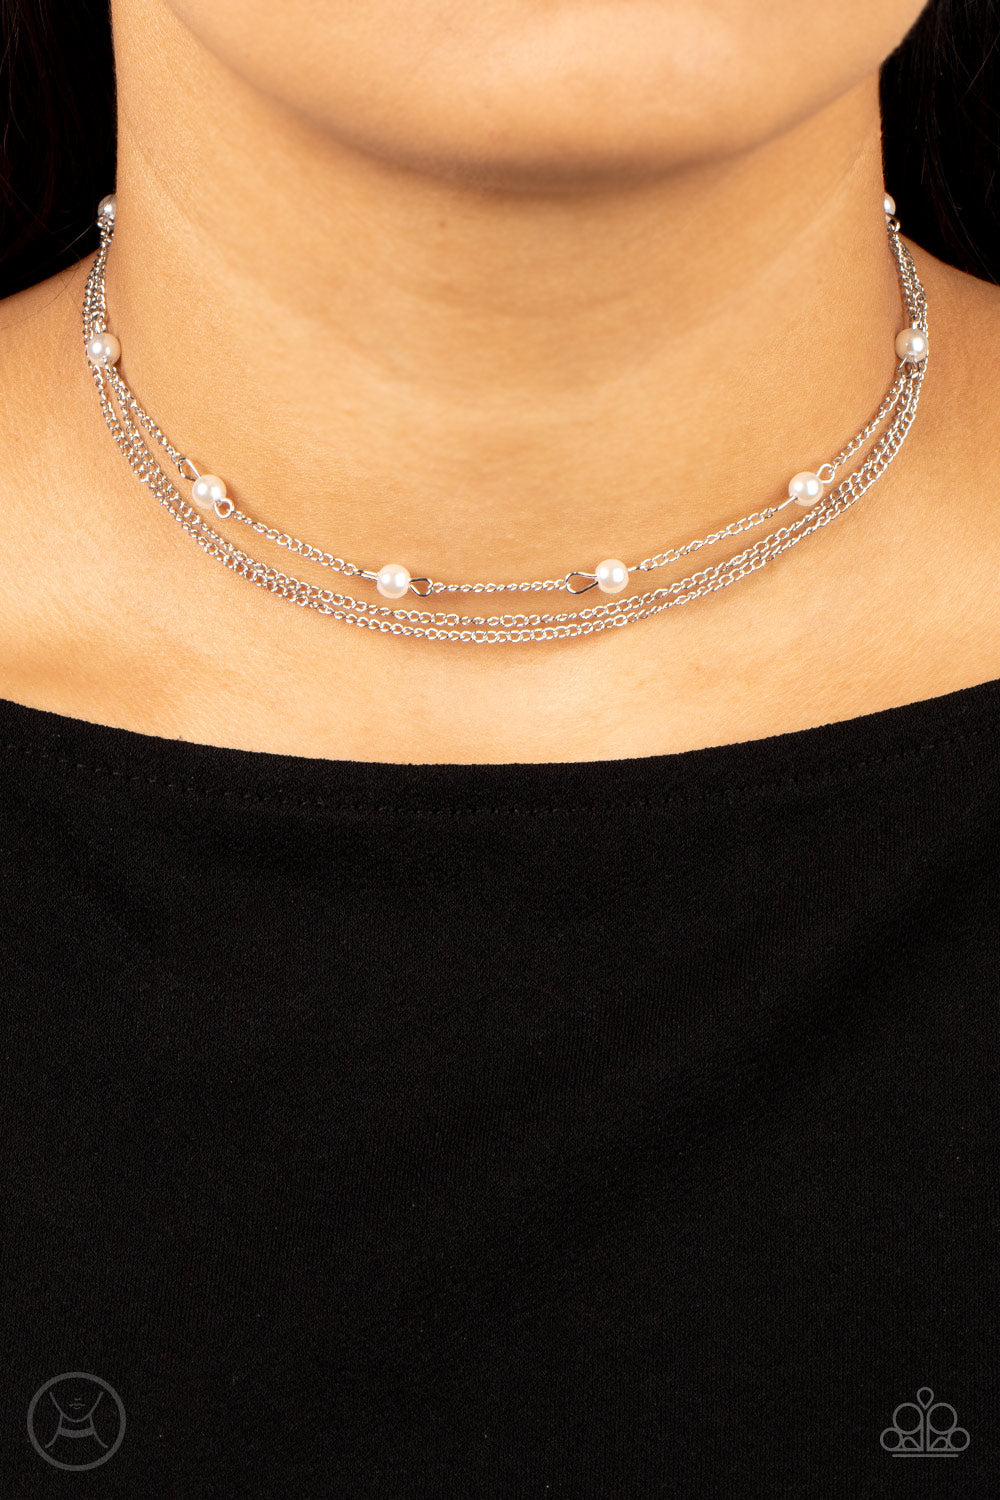 silver, silver jelwery, necklace, choker, affordable jewelry, affordable holiday gift, everyday jewelry, trending jewlery, viral jewelry, paparazzi accessories, tax free jewlery,prom jewelry, wedding jewelry, dainty, pearl, white, white jewelry, jewelry stores, jewelry stores near me, 